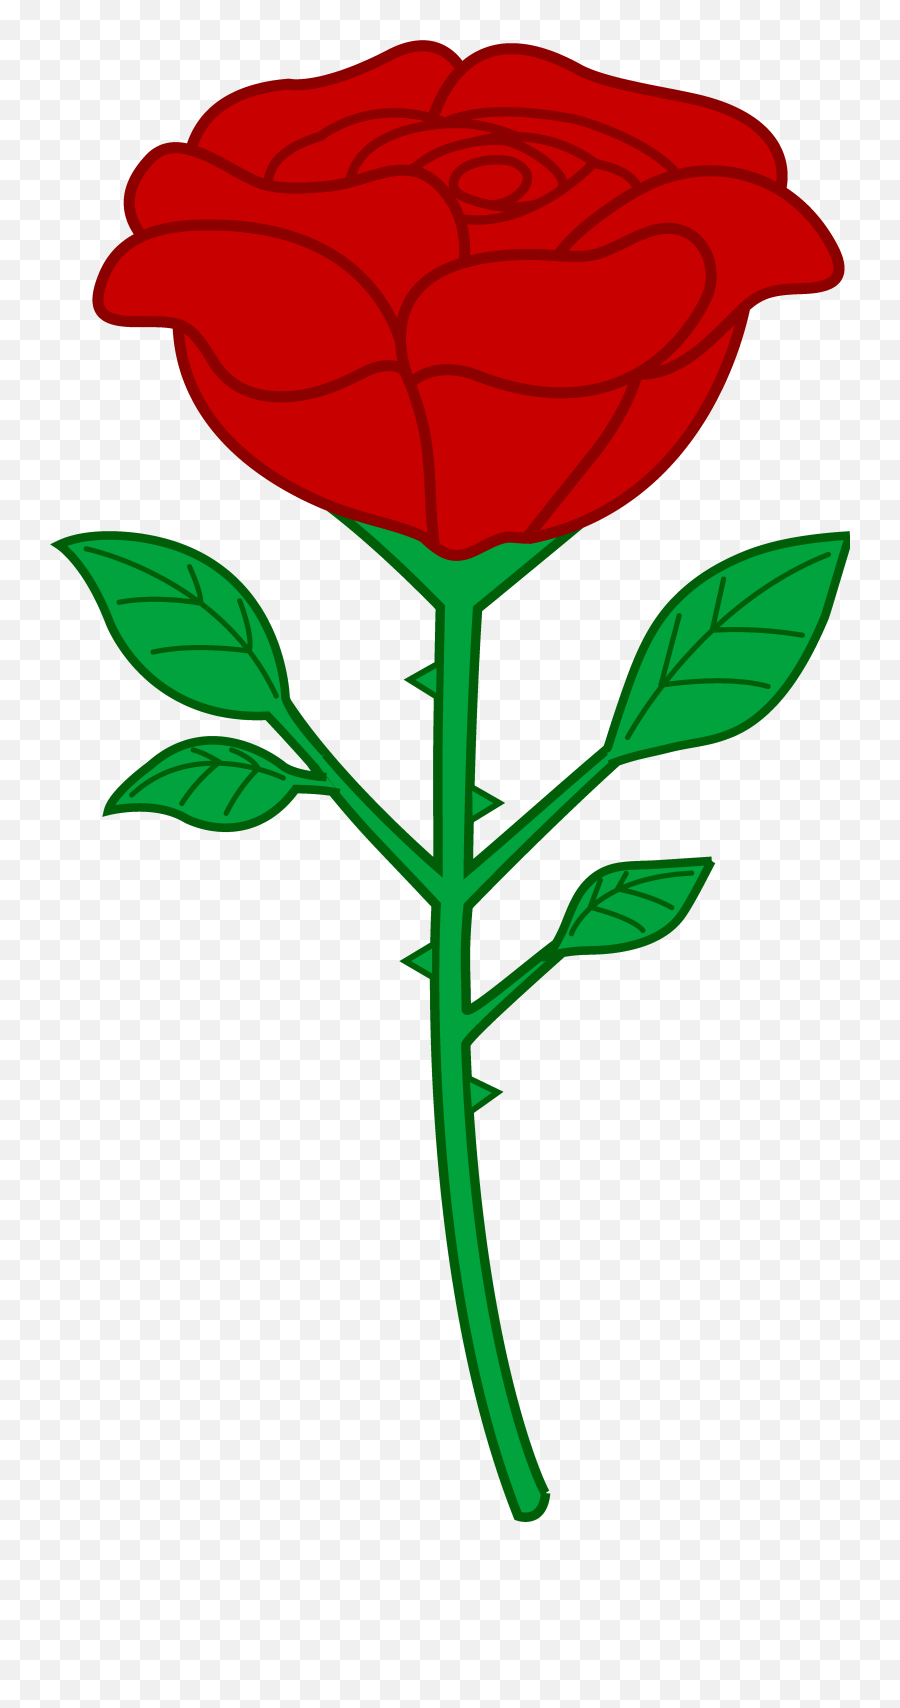 Free Cartoon Roses Pictures Download Free Clip Art Free - Rose Clip Art Emoji,Dead Rose Emoji